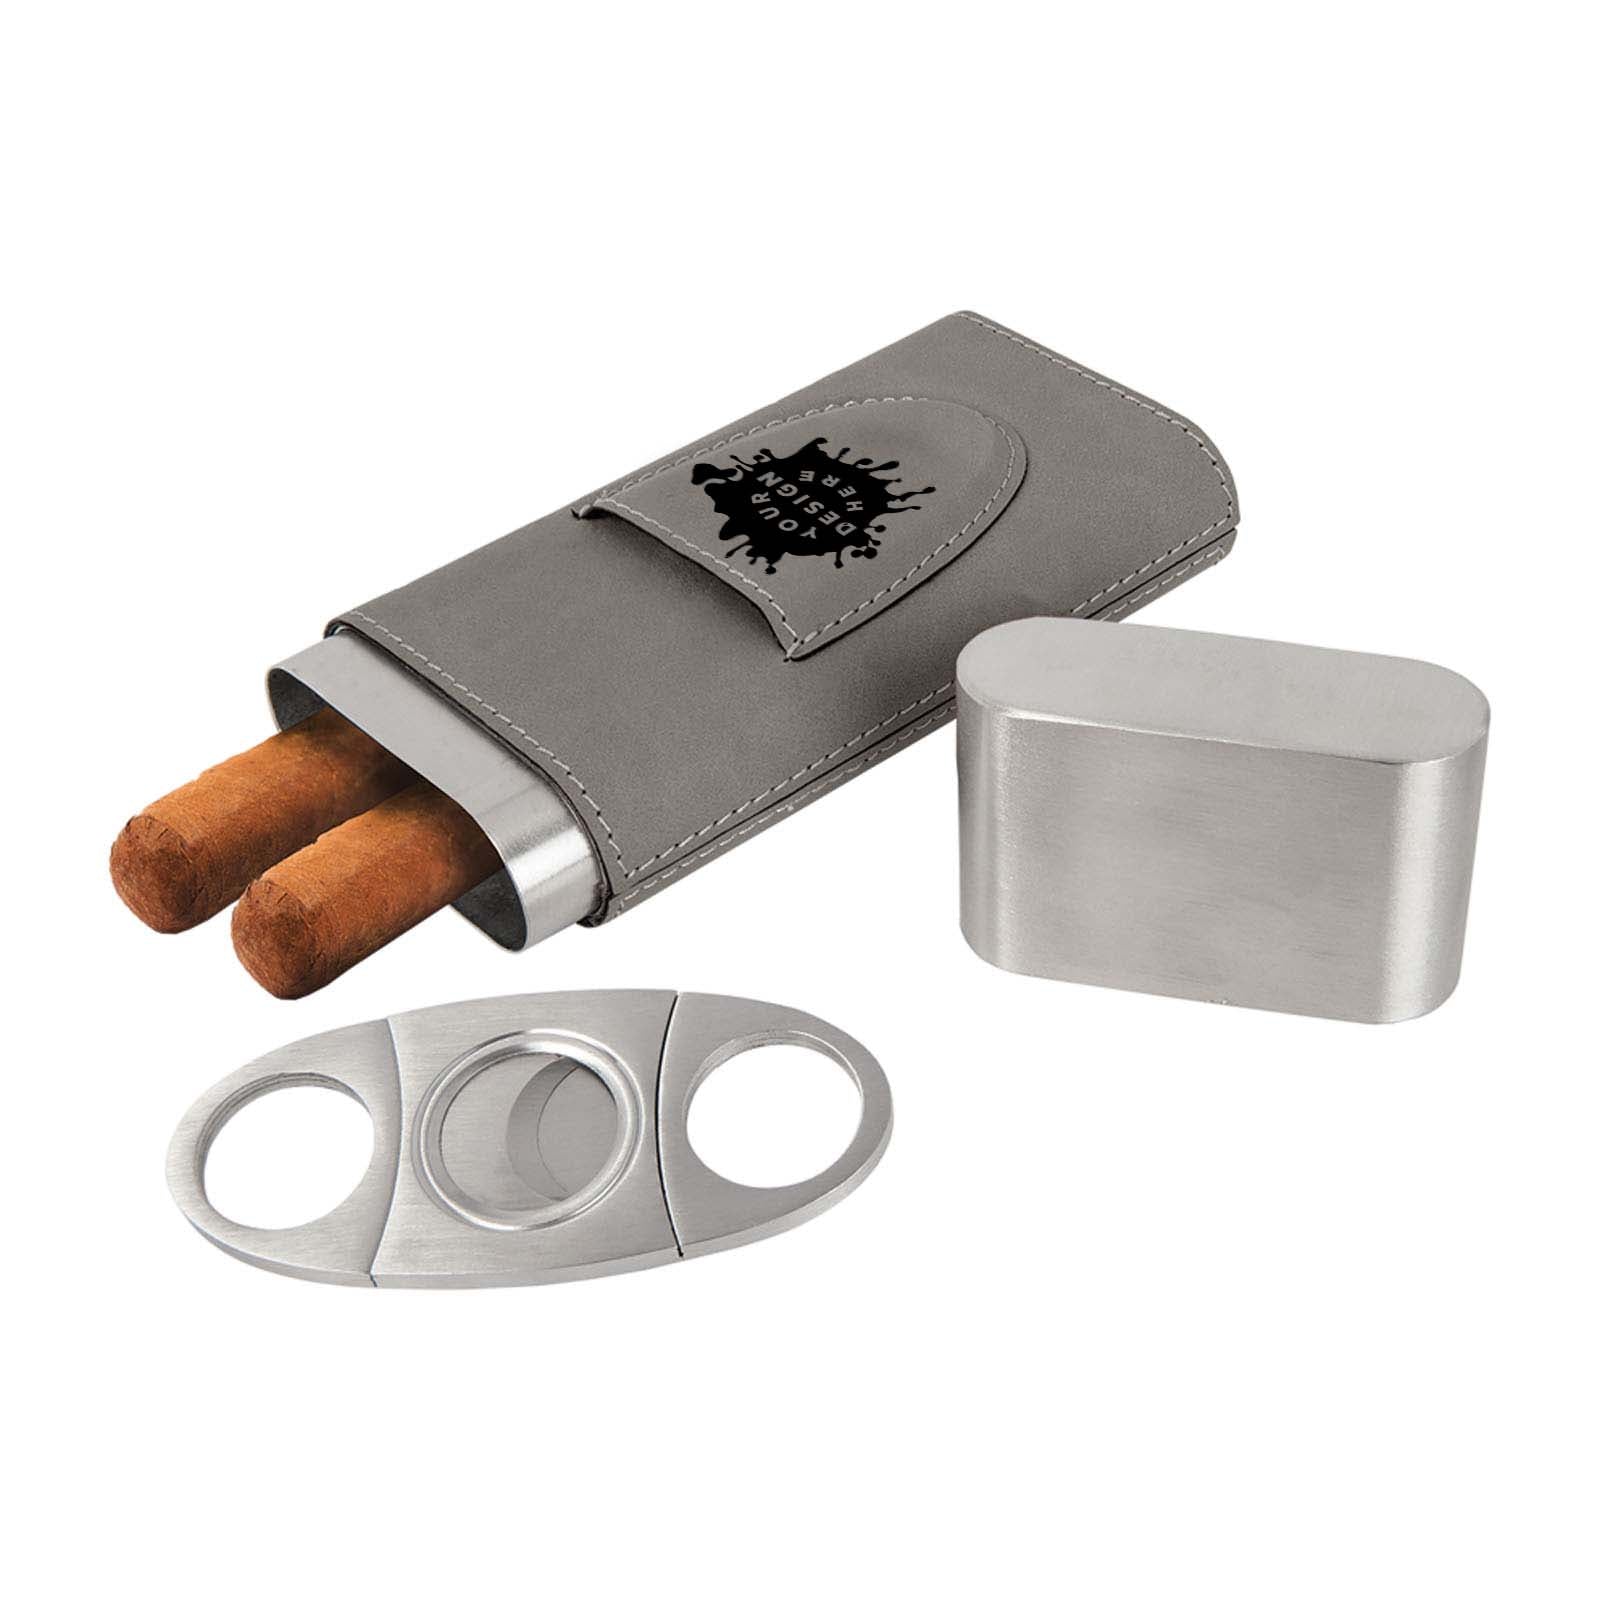 Custom-Engraved Laserable Leatherette Cigar Case with Cutter - Mato & Hash